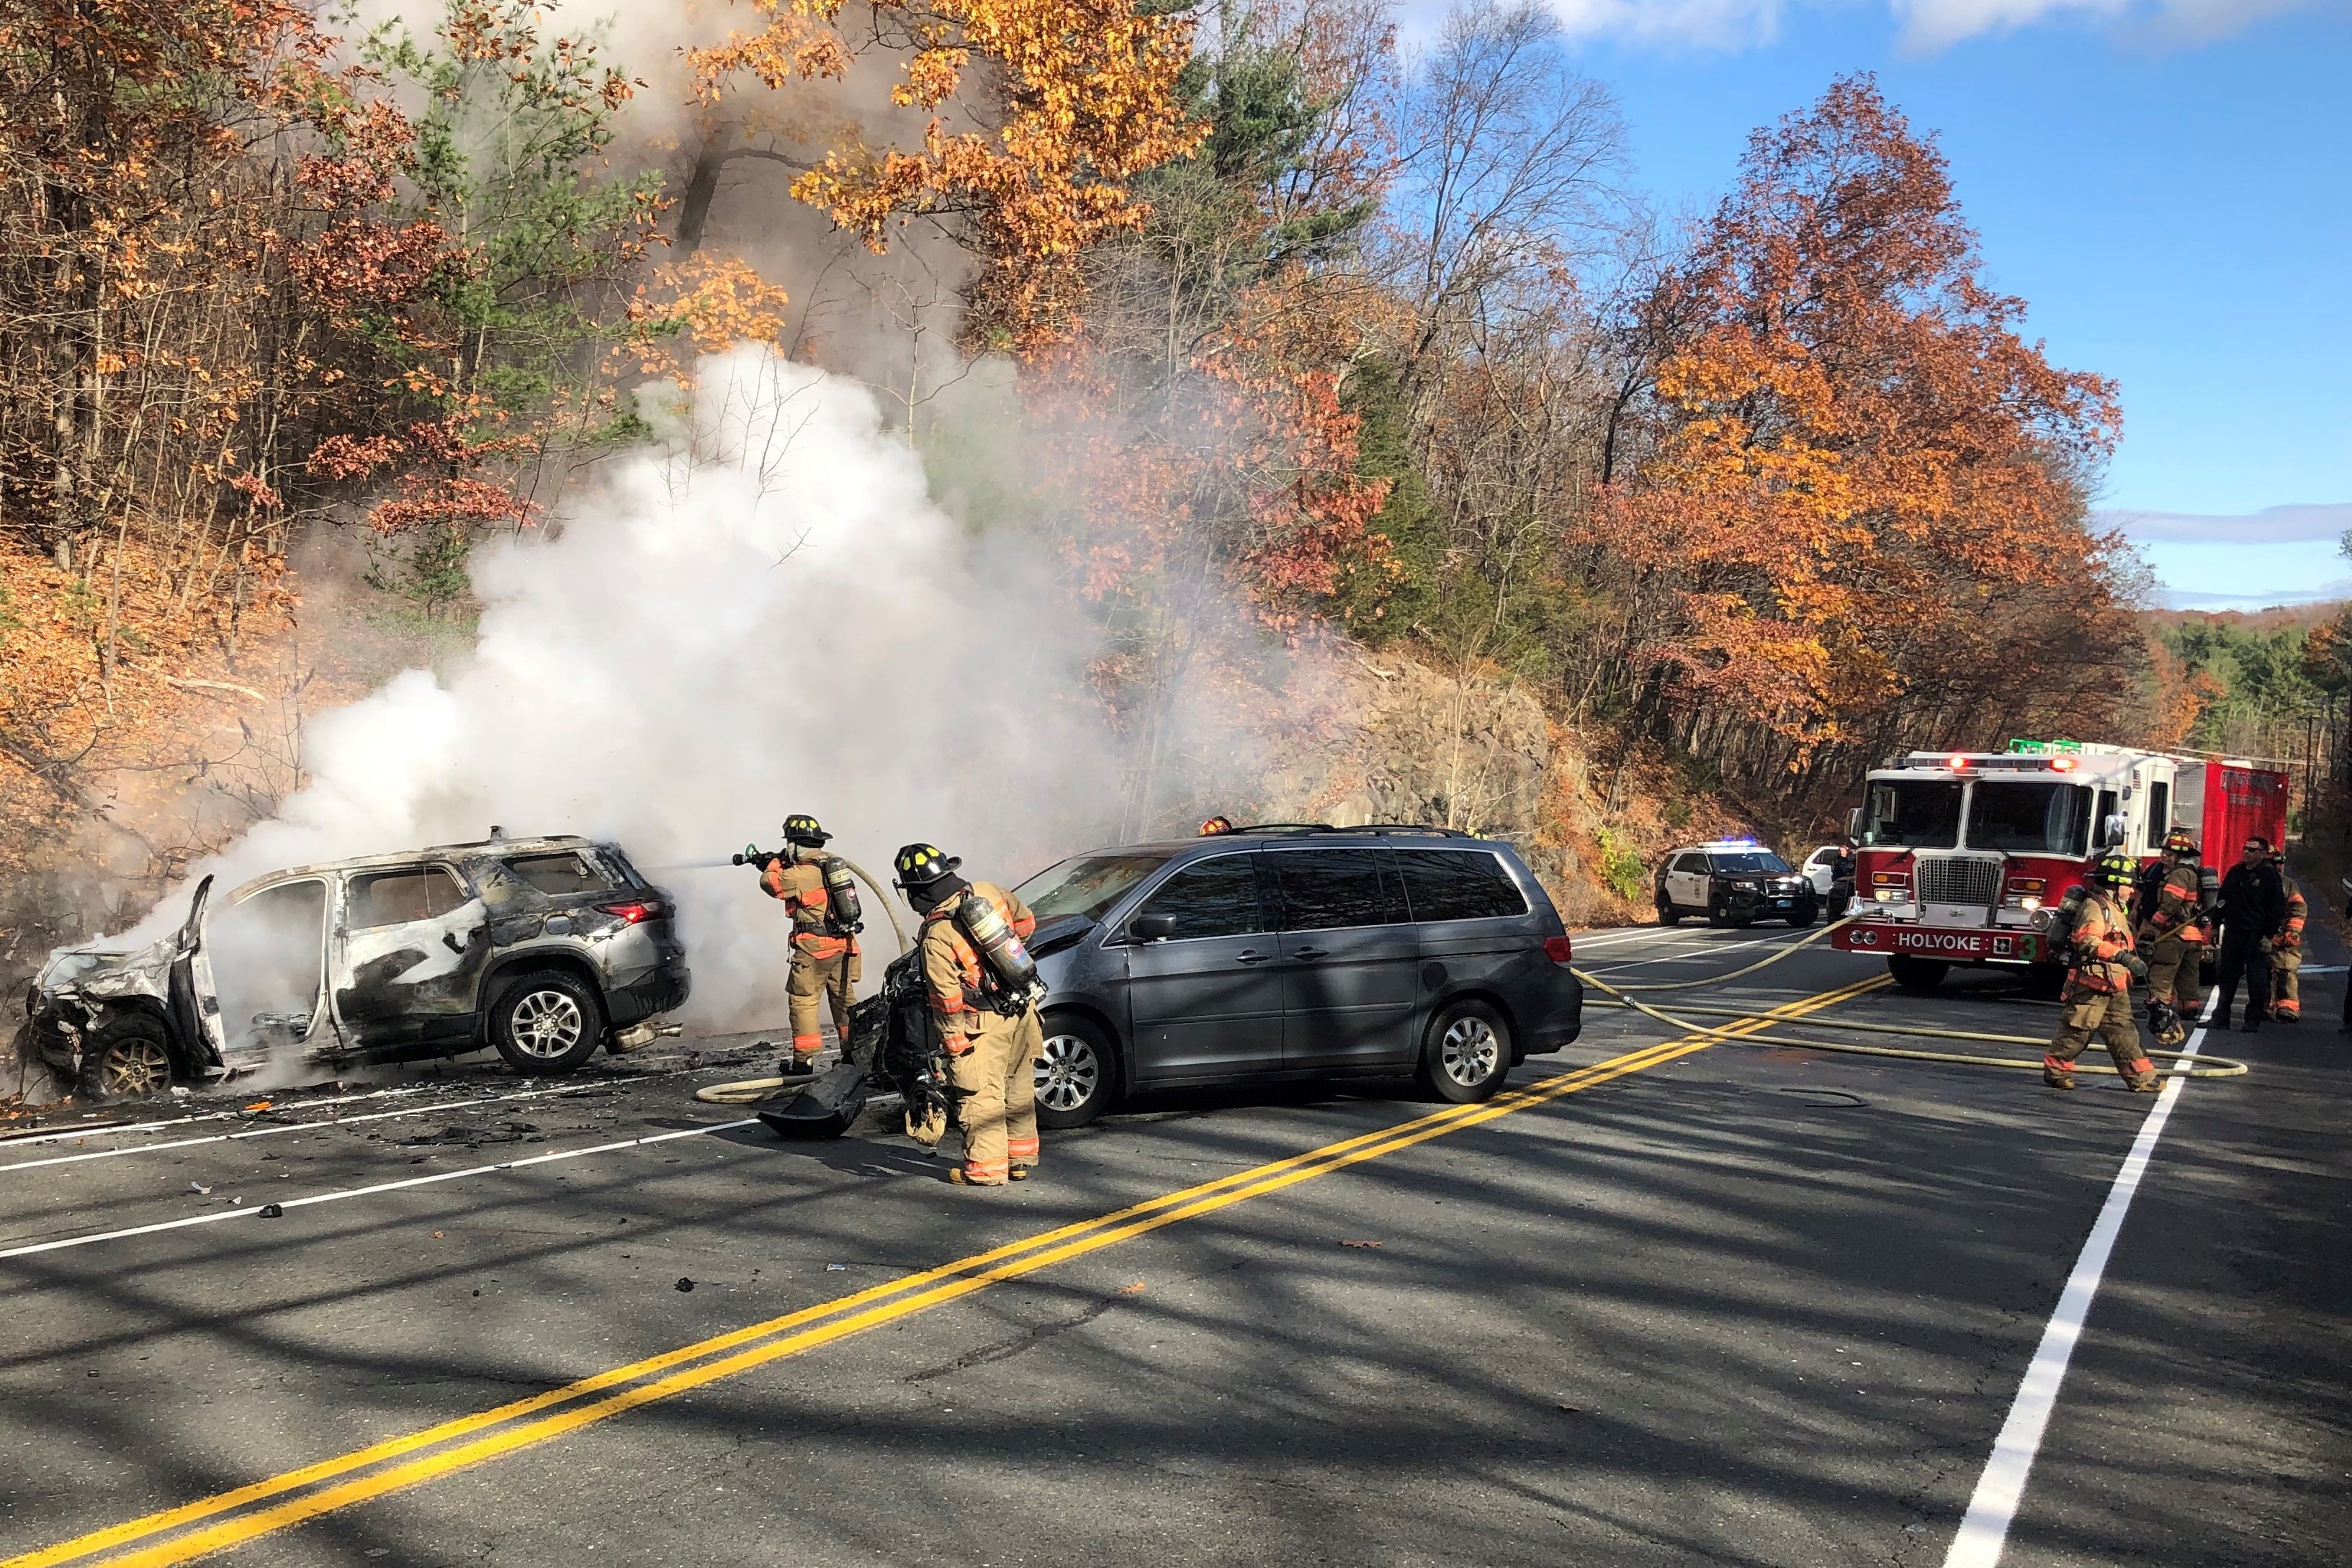 route 202 accident today